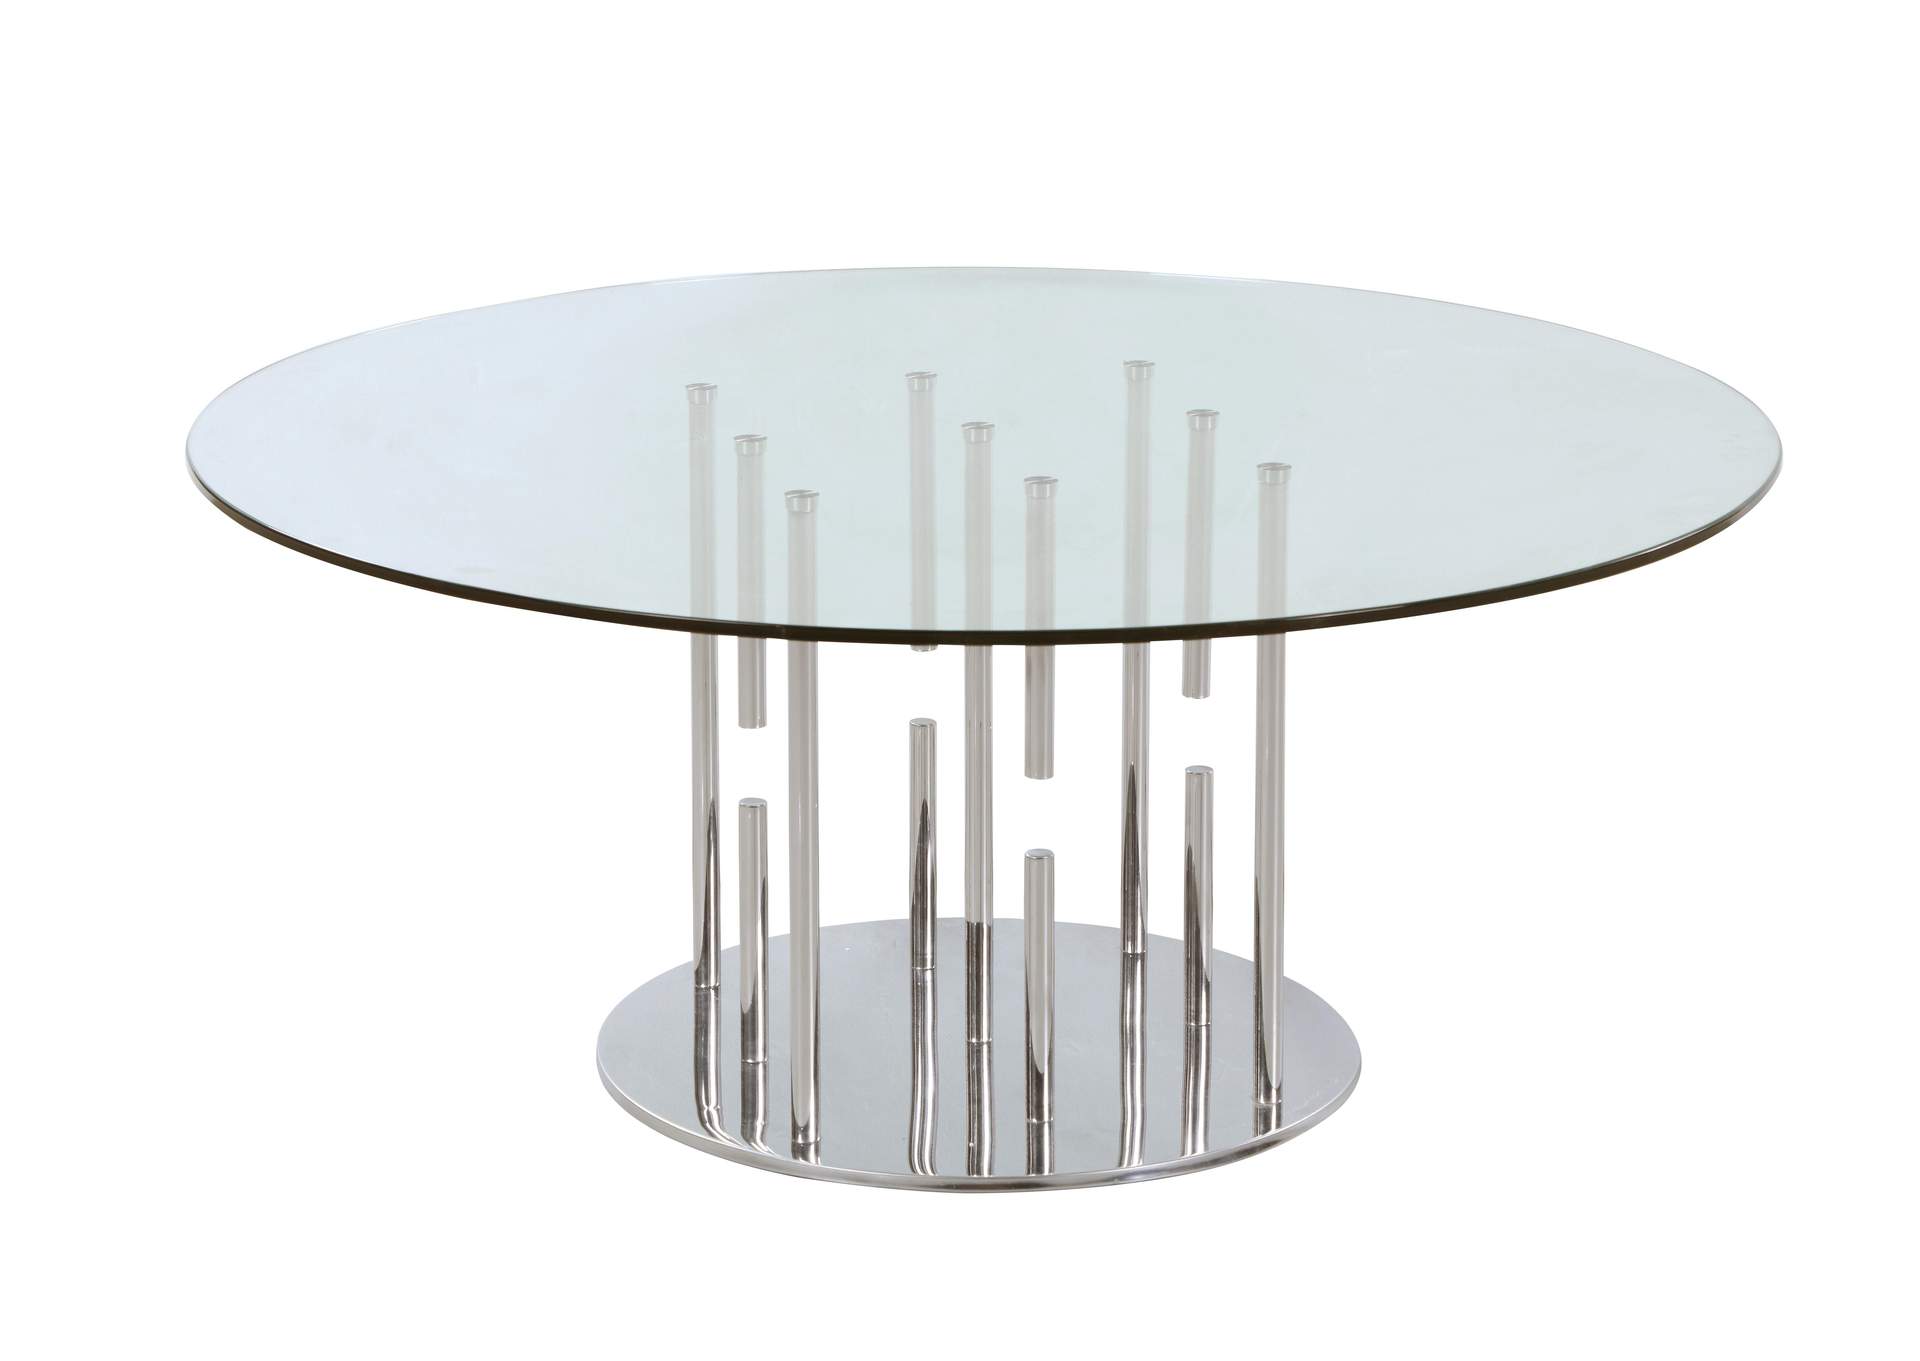 Floating Pedestal,Chintaly Imports